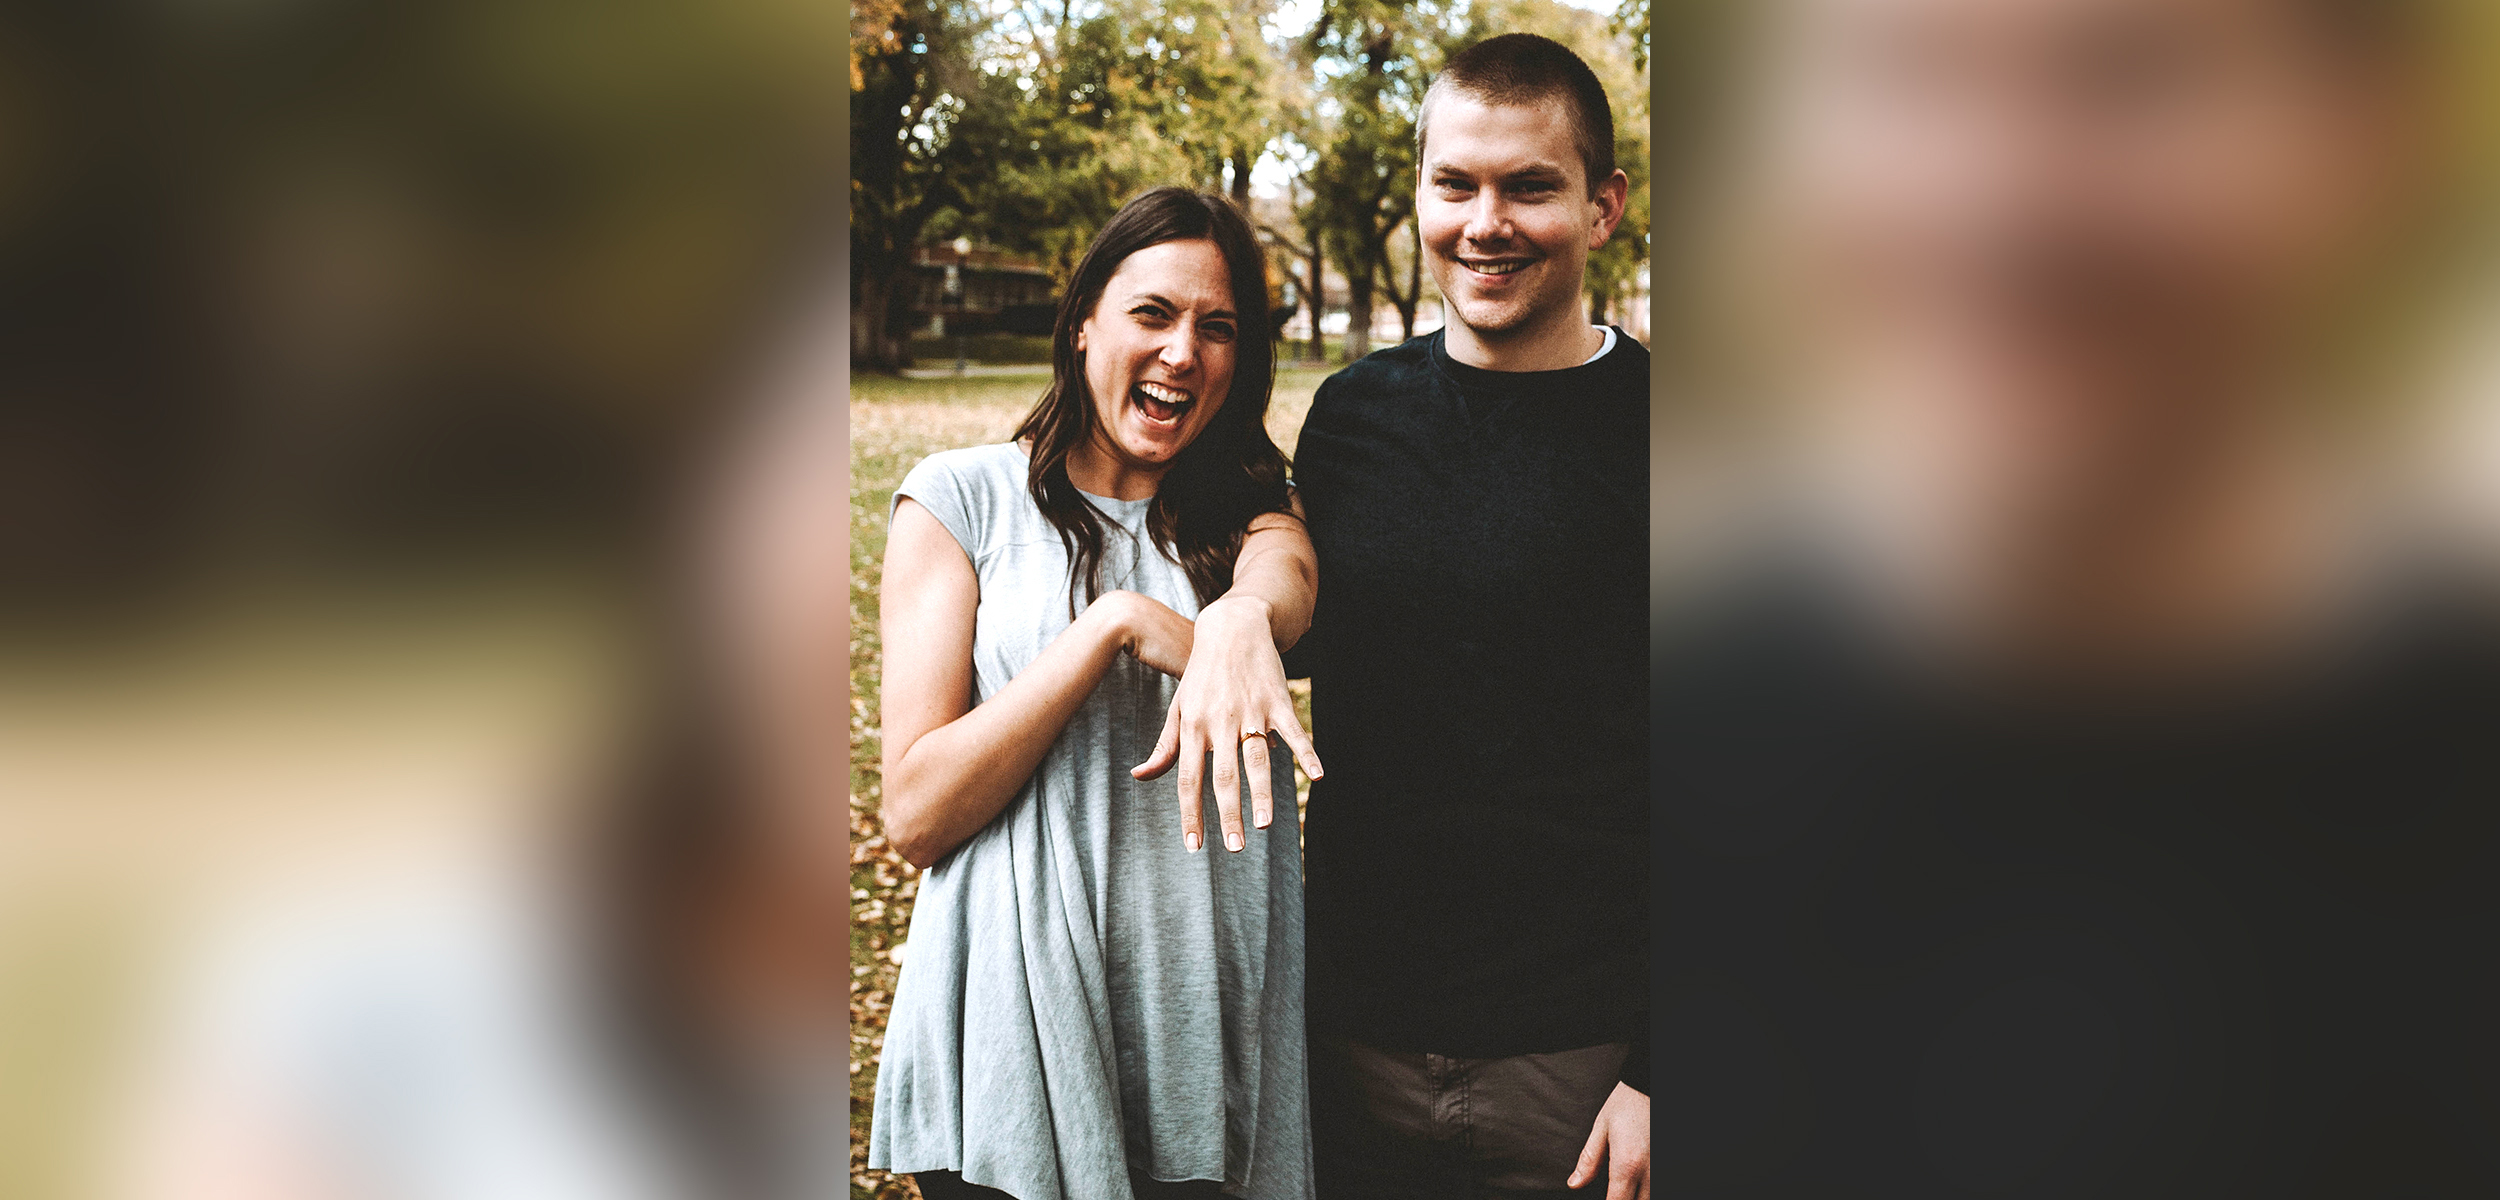 PHOTO: Sara Trigero and Dallin Knecht plan to tie the knot in summer 2019.